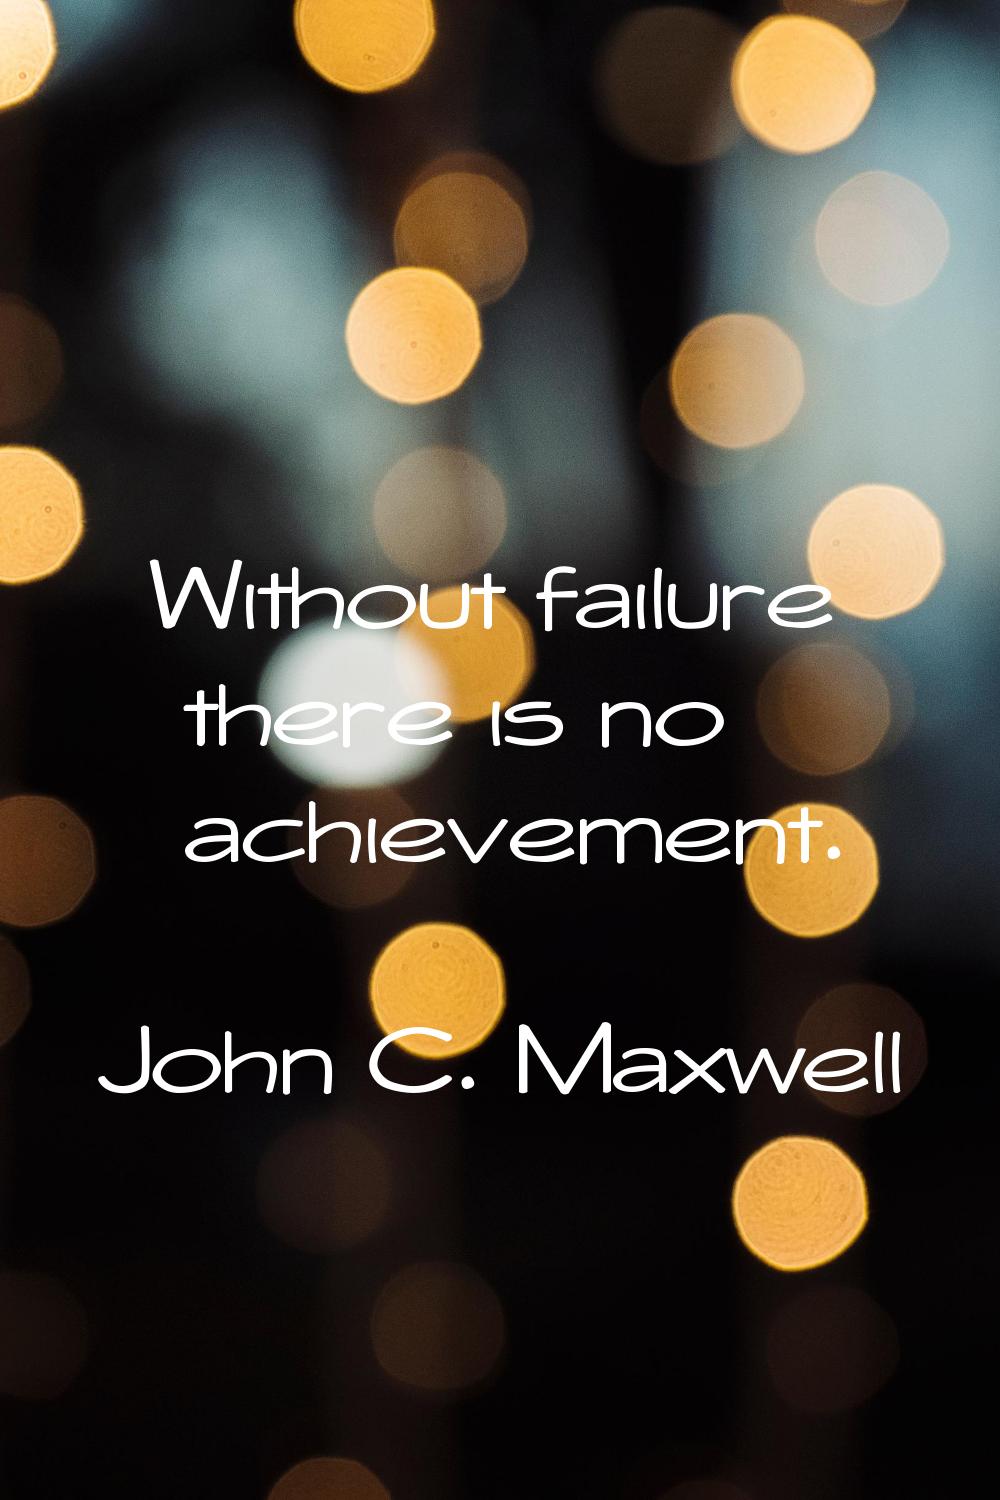 Without failure there is no achievement.